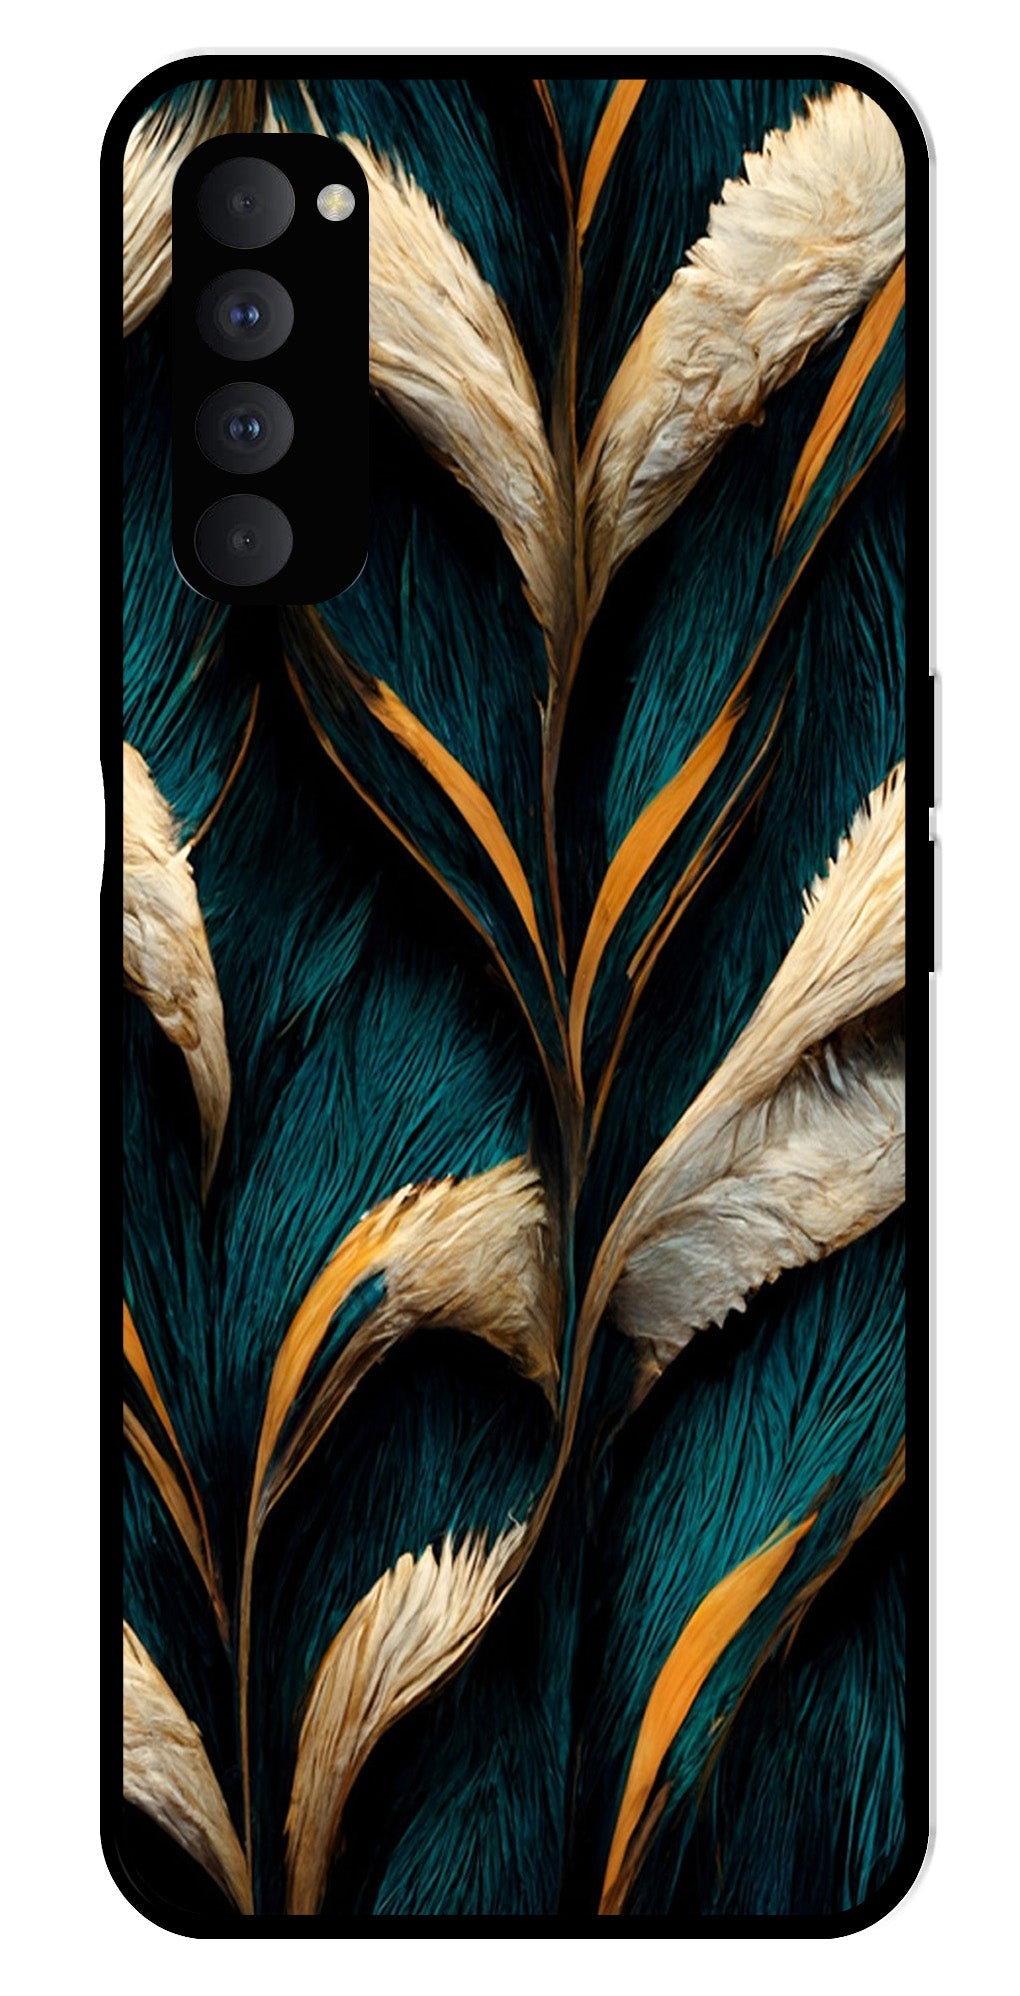 Feathers Metal Mobile Case for Oppo Reno 4 Pro   (Design No -30)